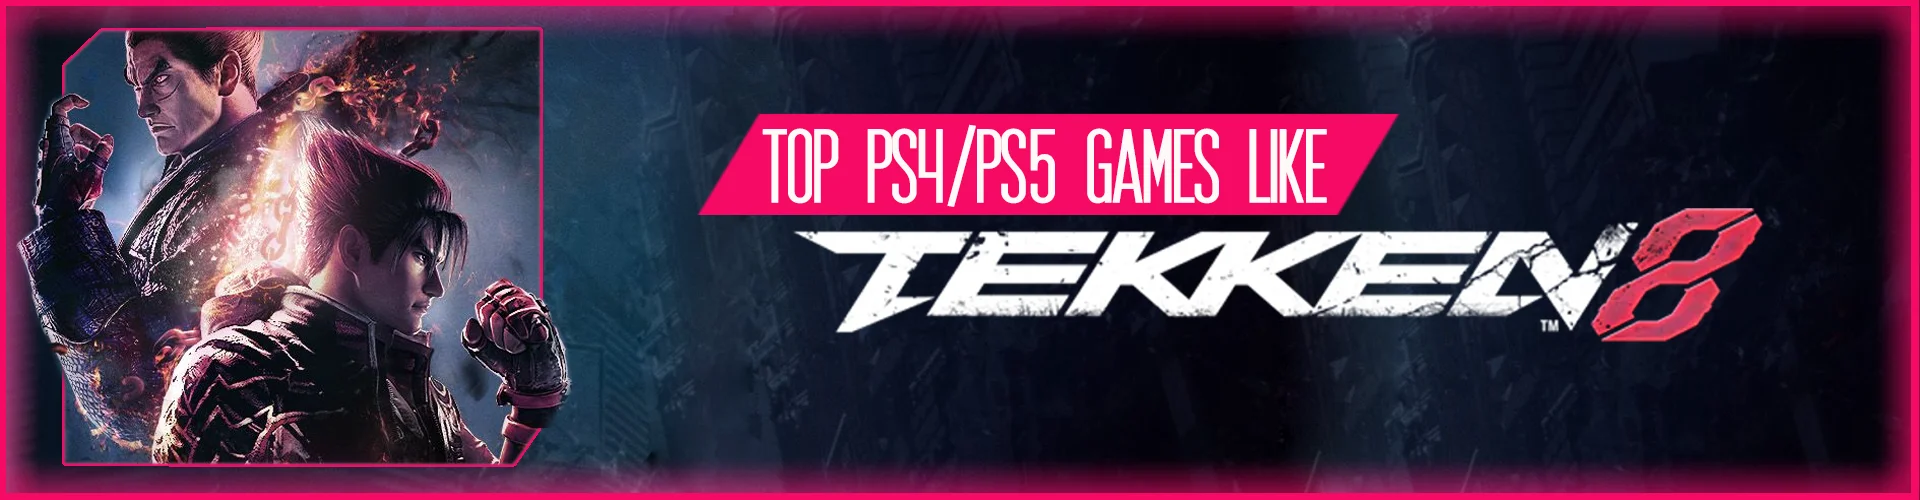 The Top Games Like Tekken 8 on PS4/PS5